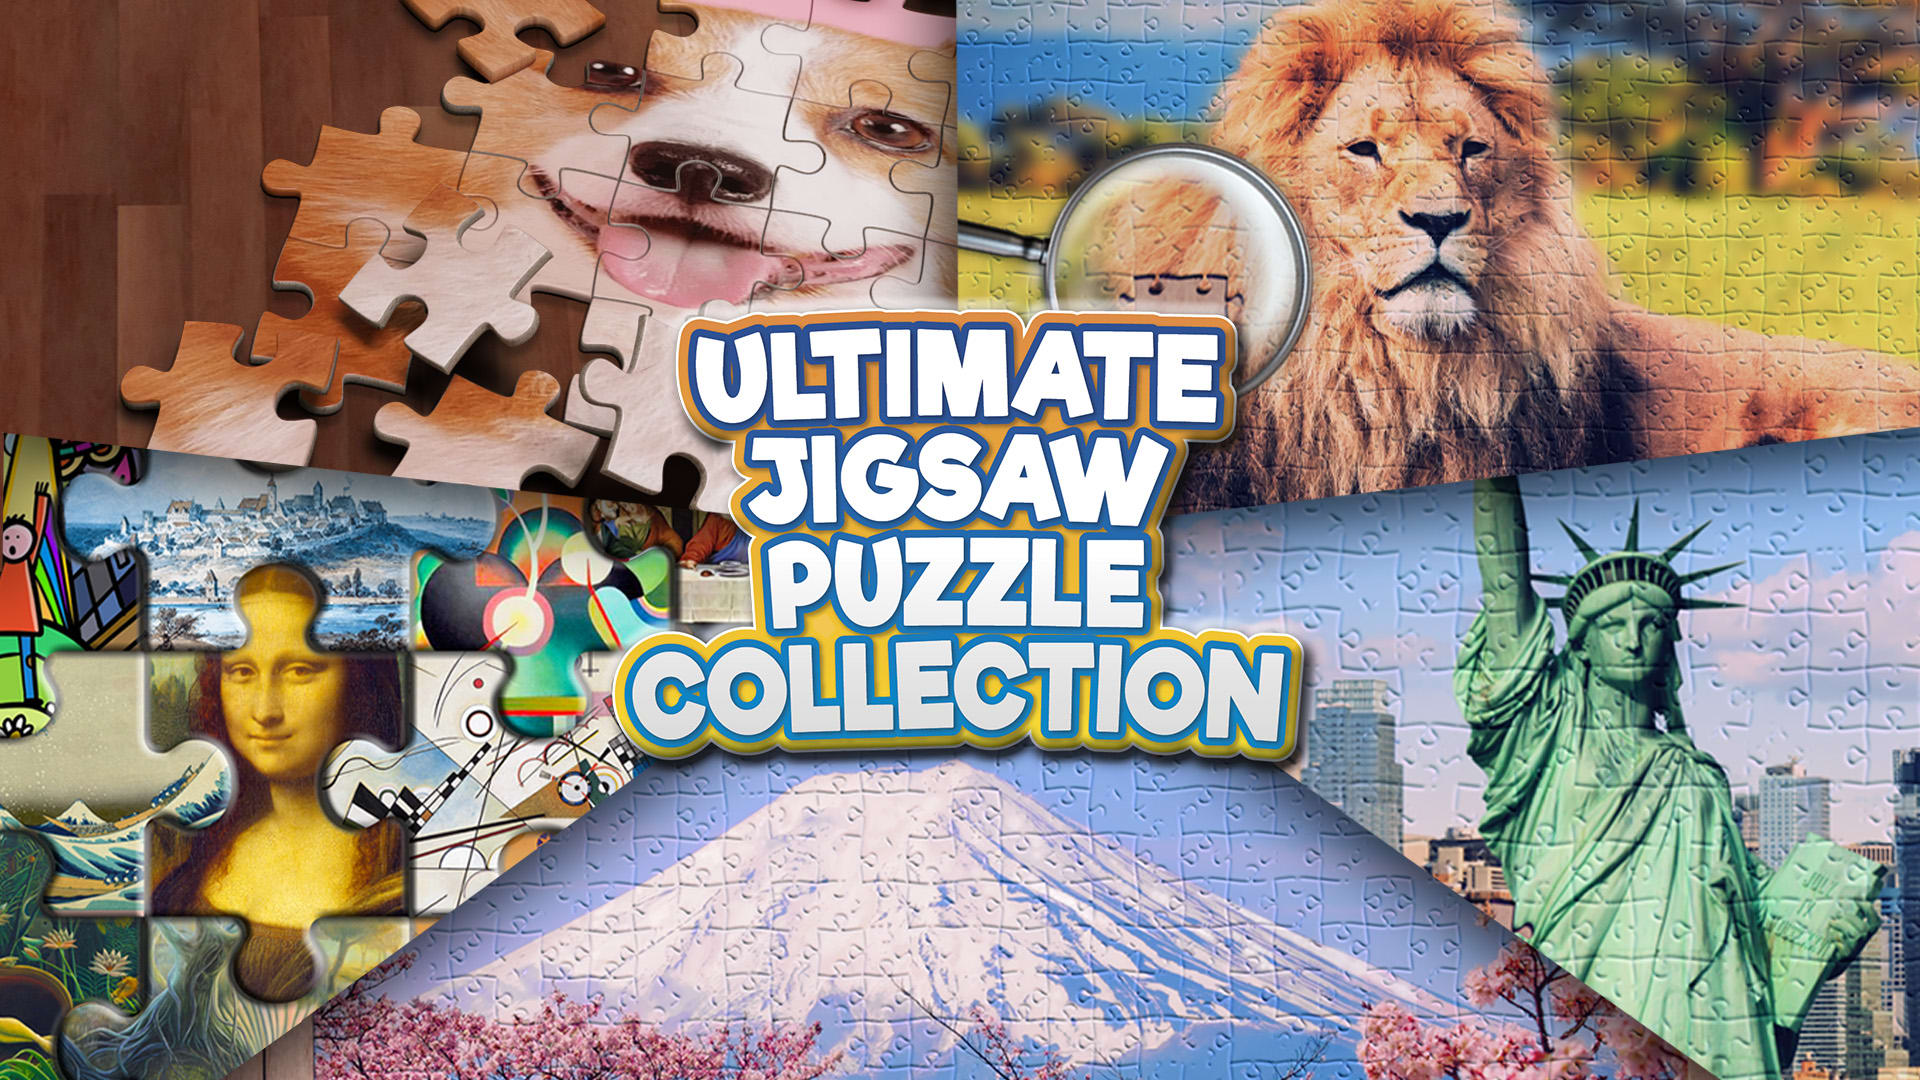 Ultimate Jigsaw Puzzle Collection